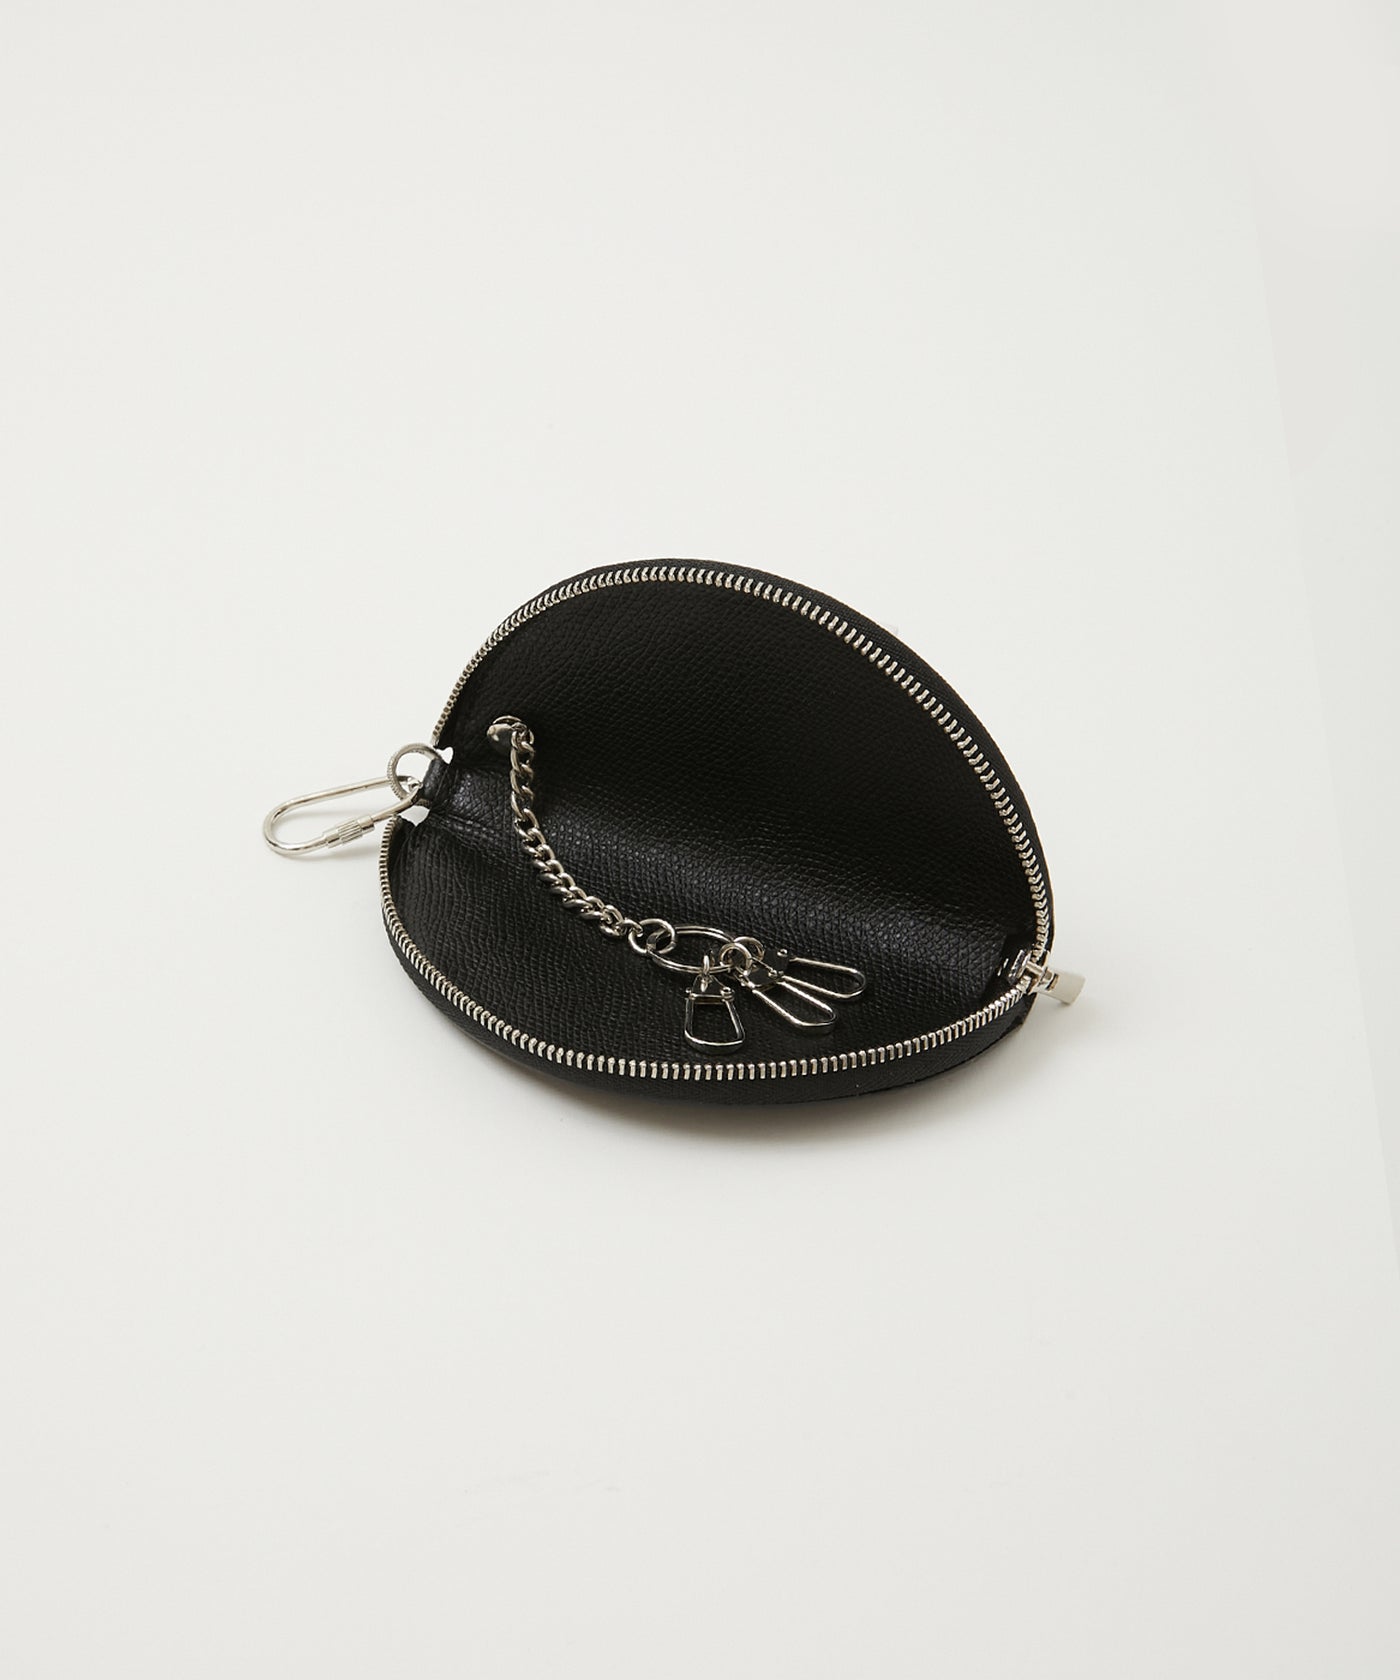 Optional Ring HARF MOON KEY POUCH